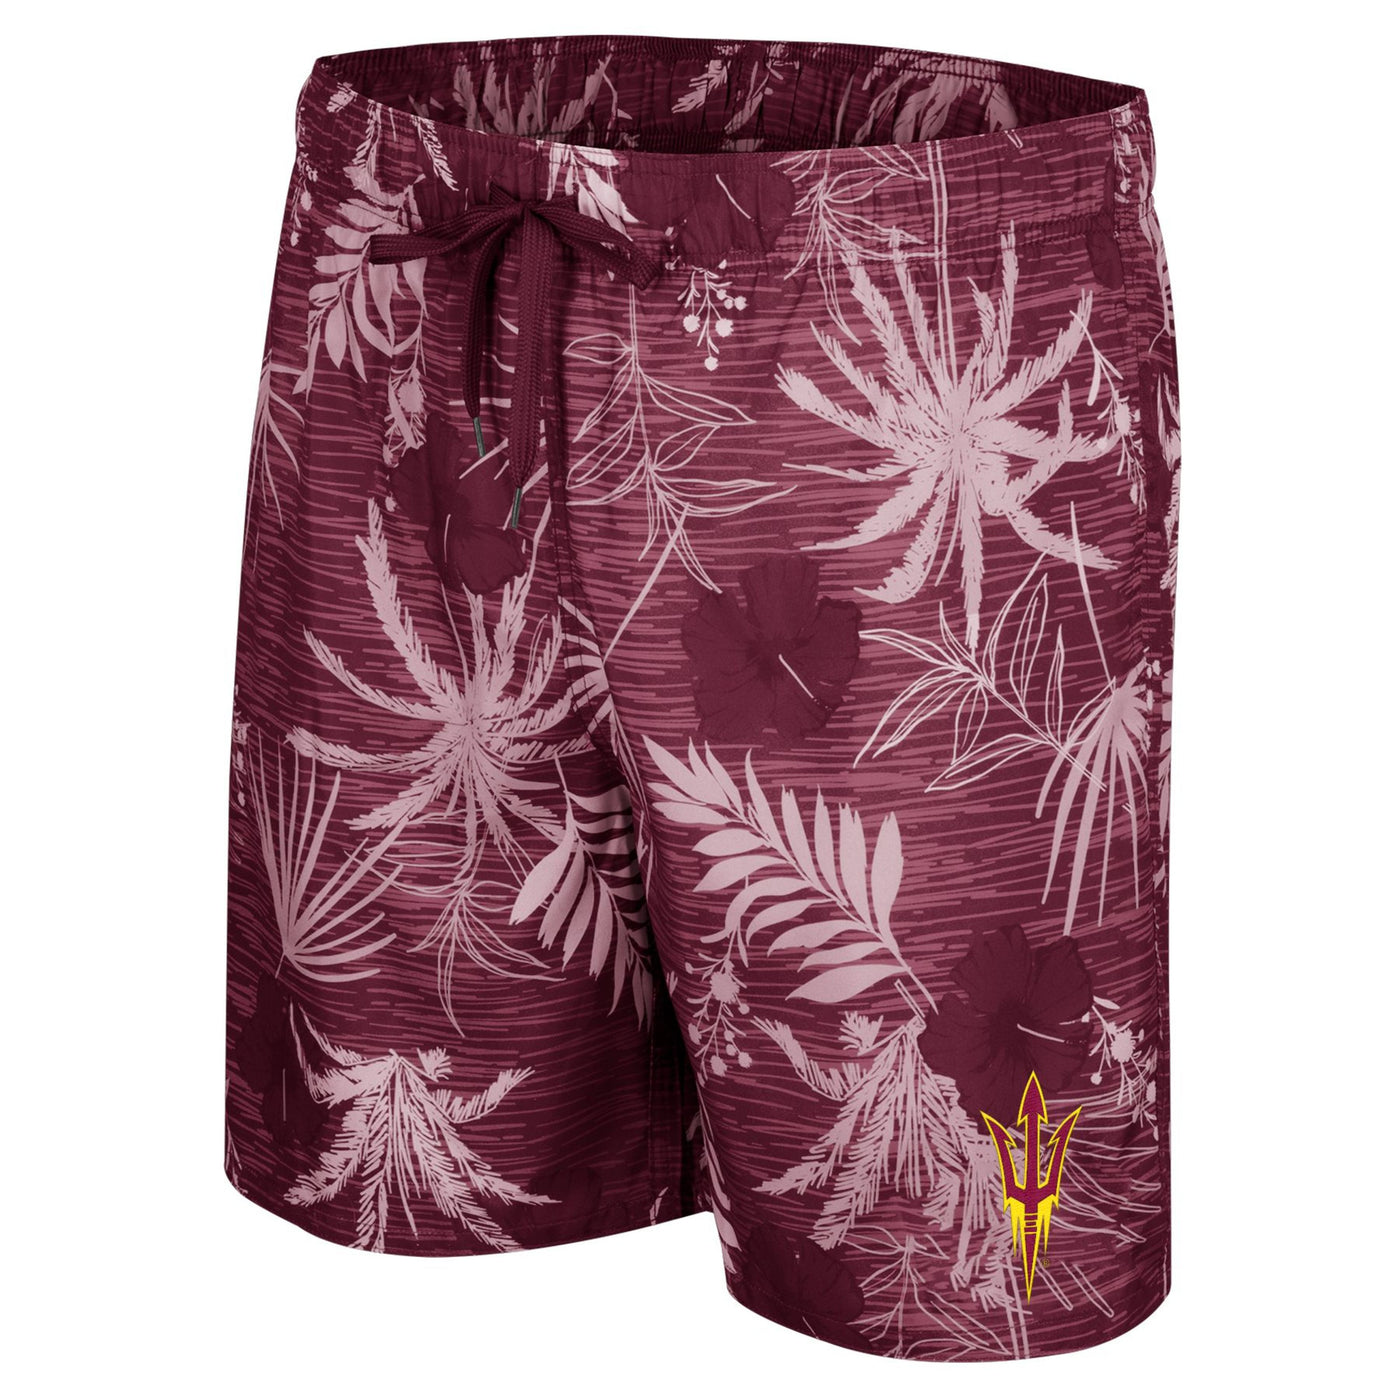 ASU maroon tropical swim shorts with a maroon drawstring and a pitchfork on the left leg